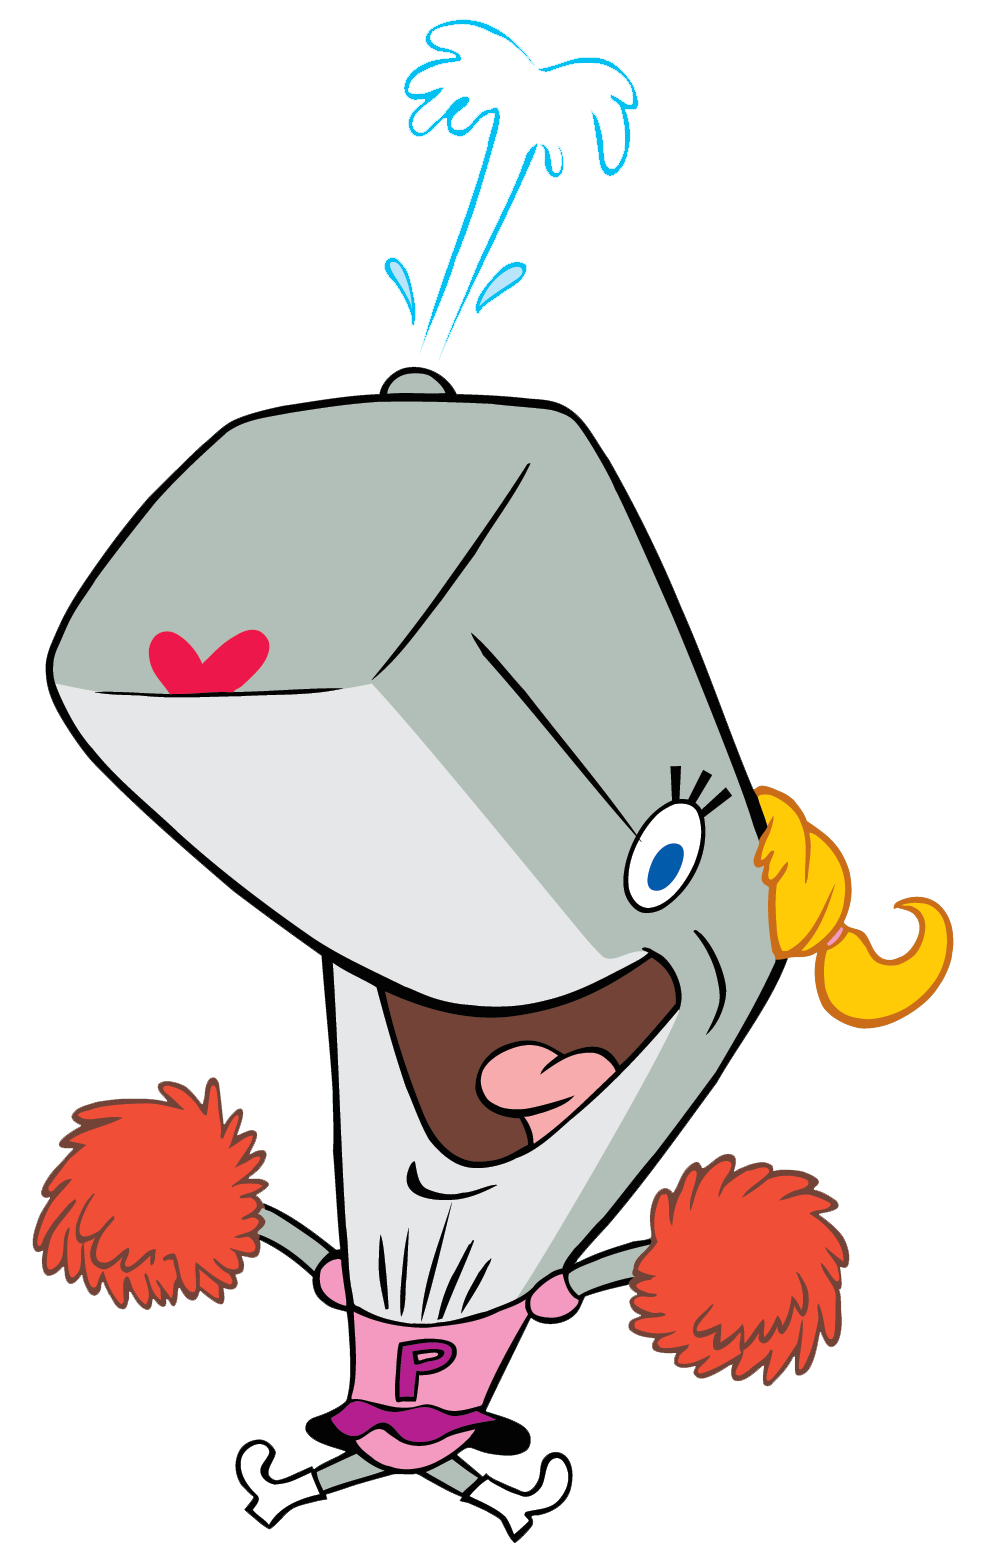 clipart whale cartoon character